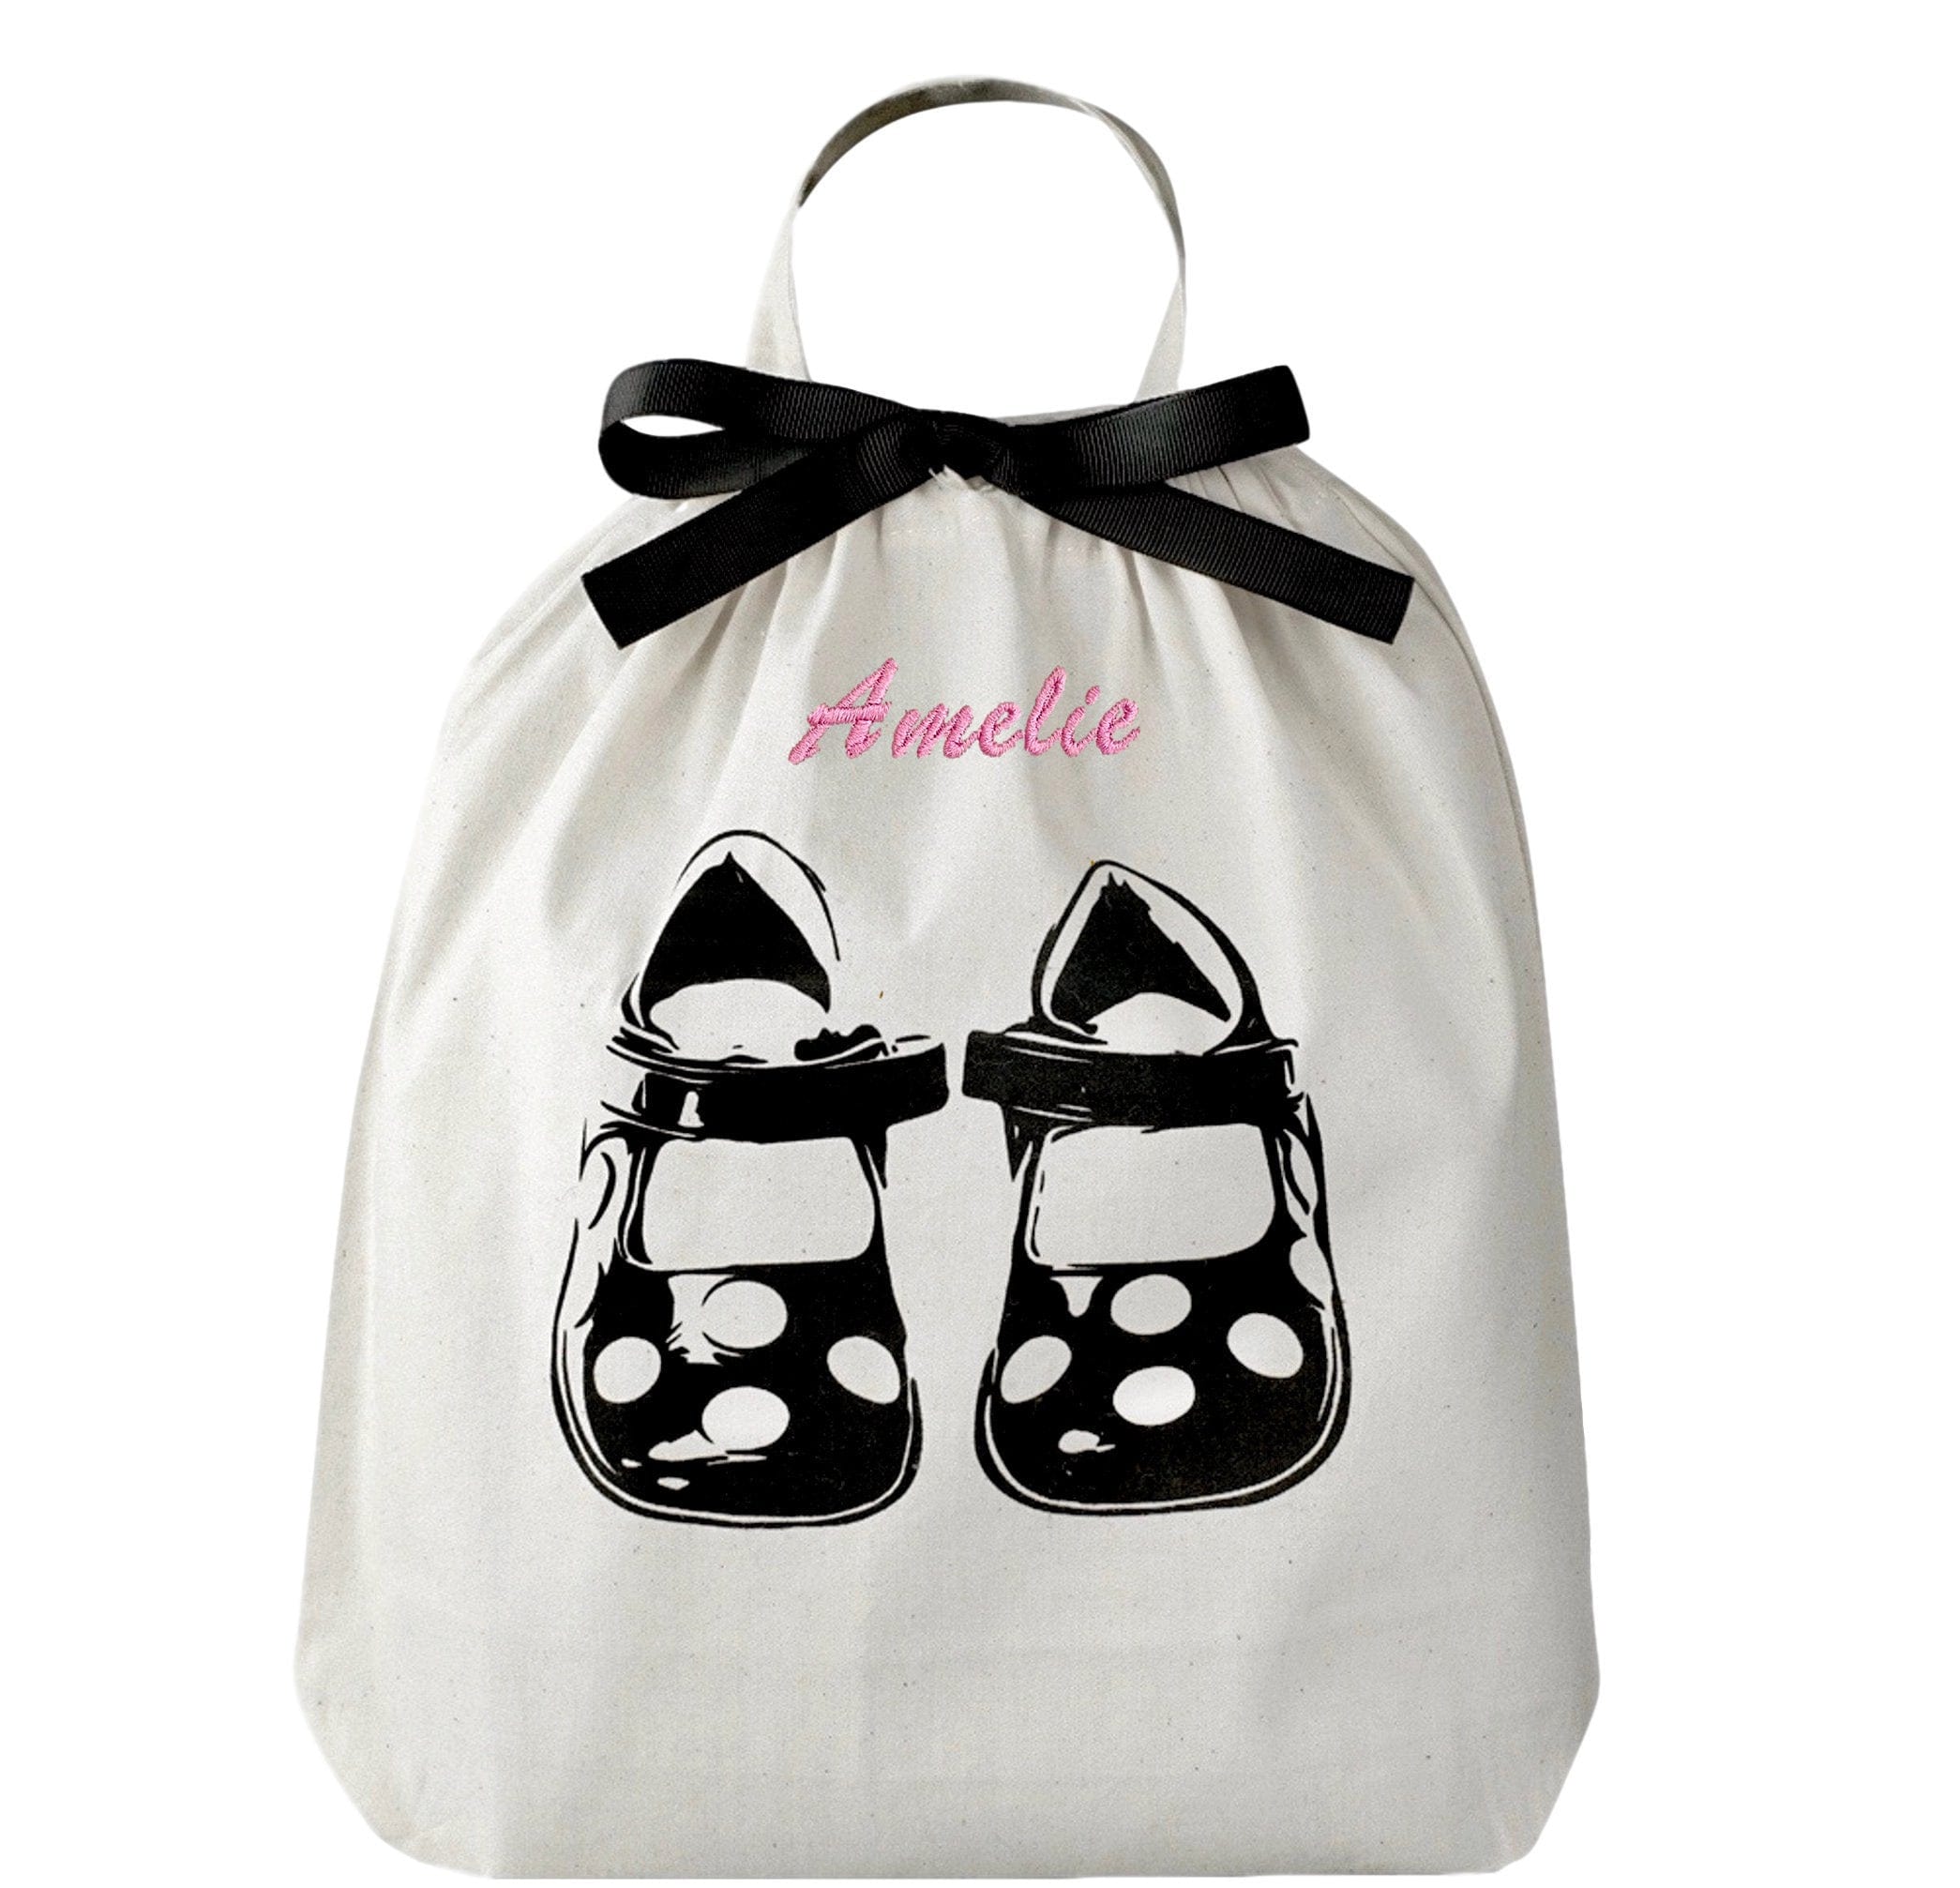 Children shoe bag with "Amelia" monogrammed on the top. 